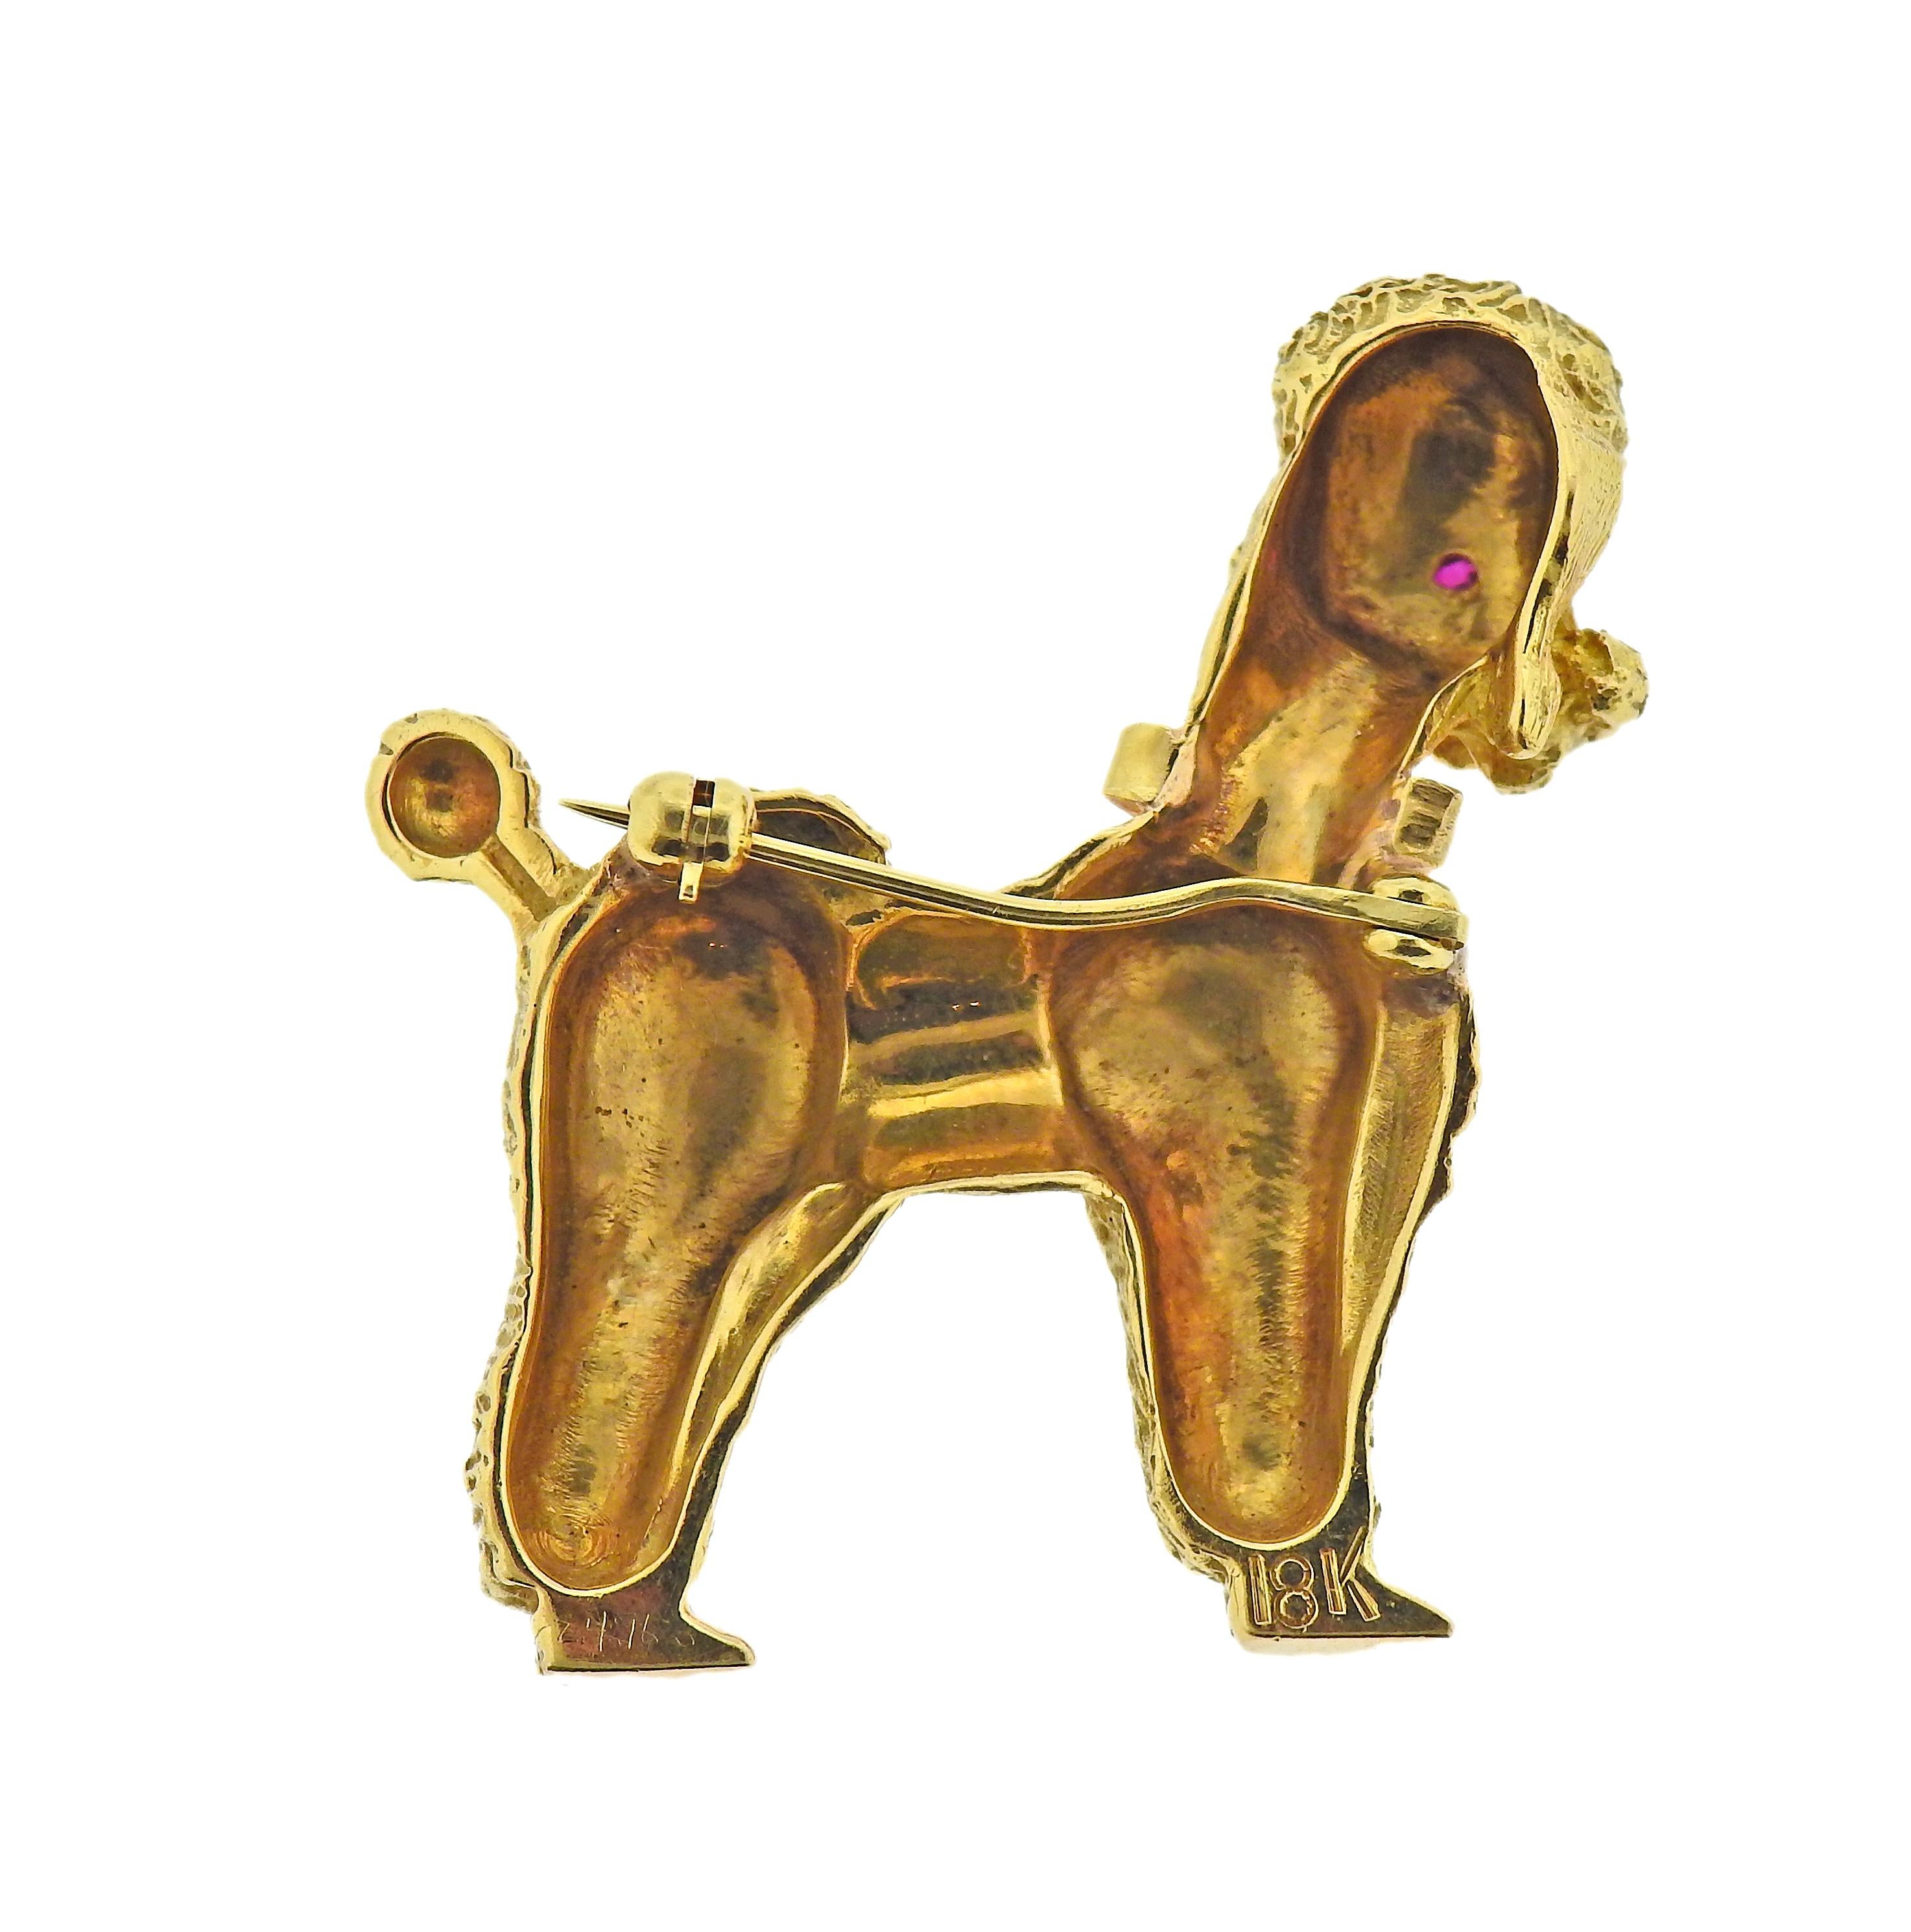 Circa 1960s 18k gold poodle dog brooch, with ruby eyes and collar. Brooch is 38mm x 32mm. Marked 18k. Weight - 16.3 grams.